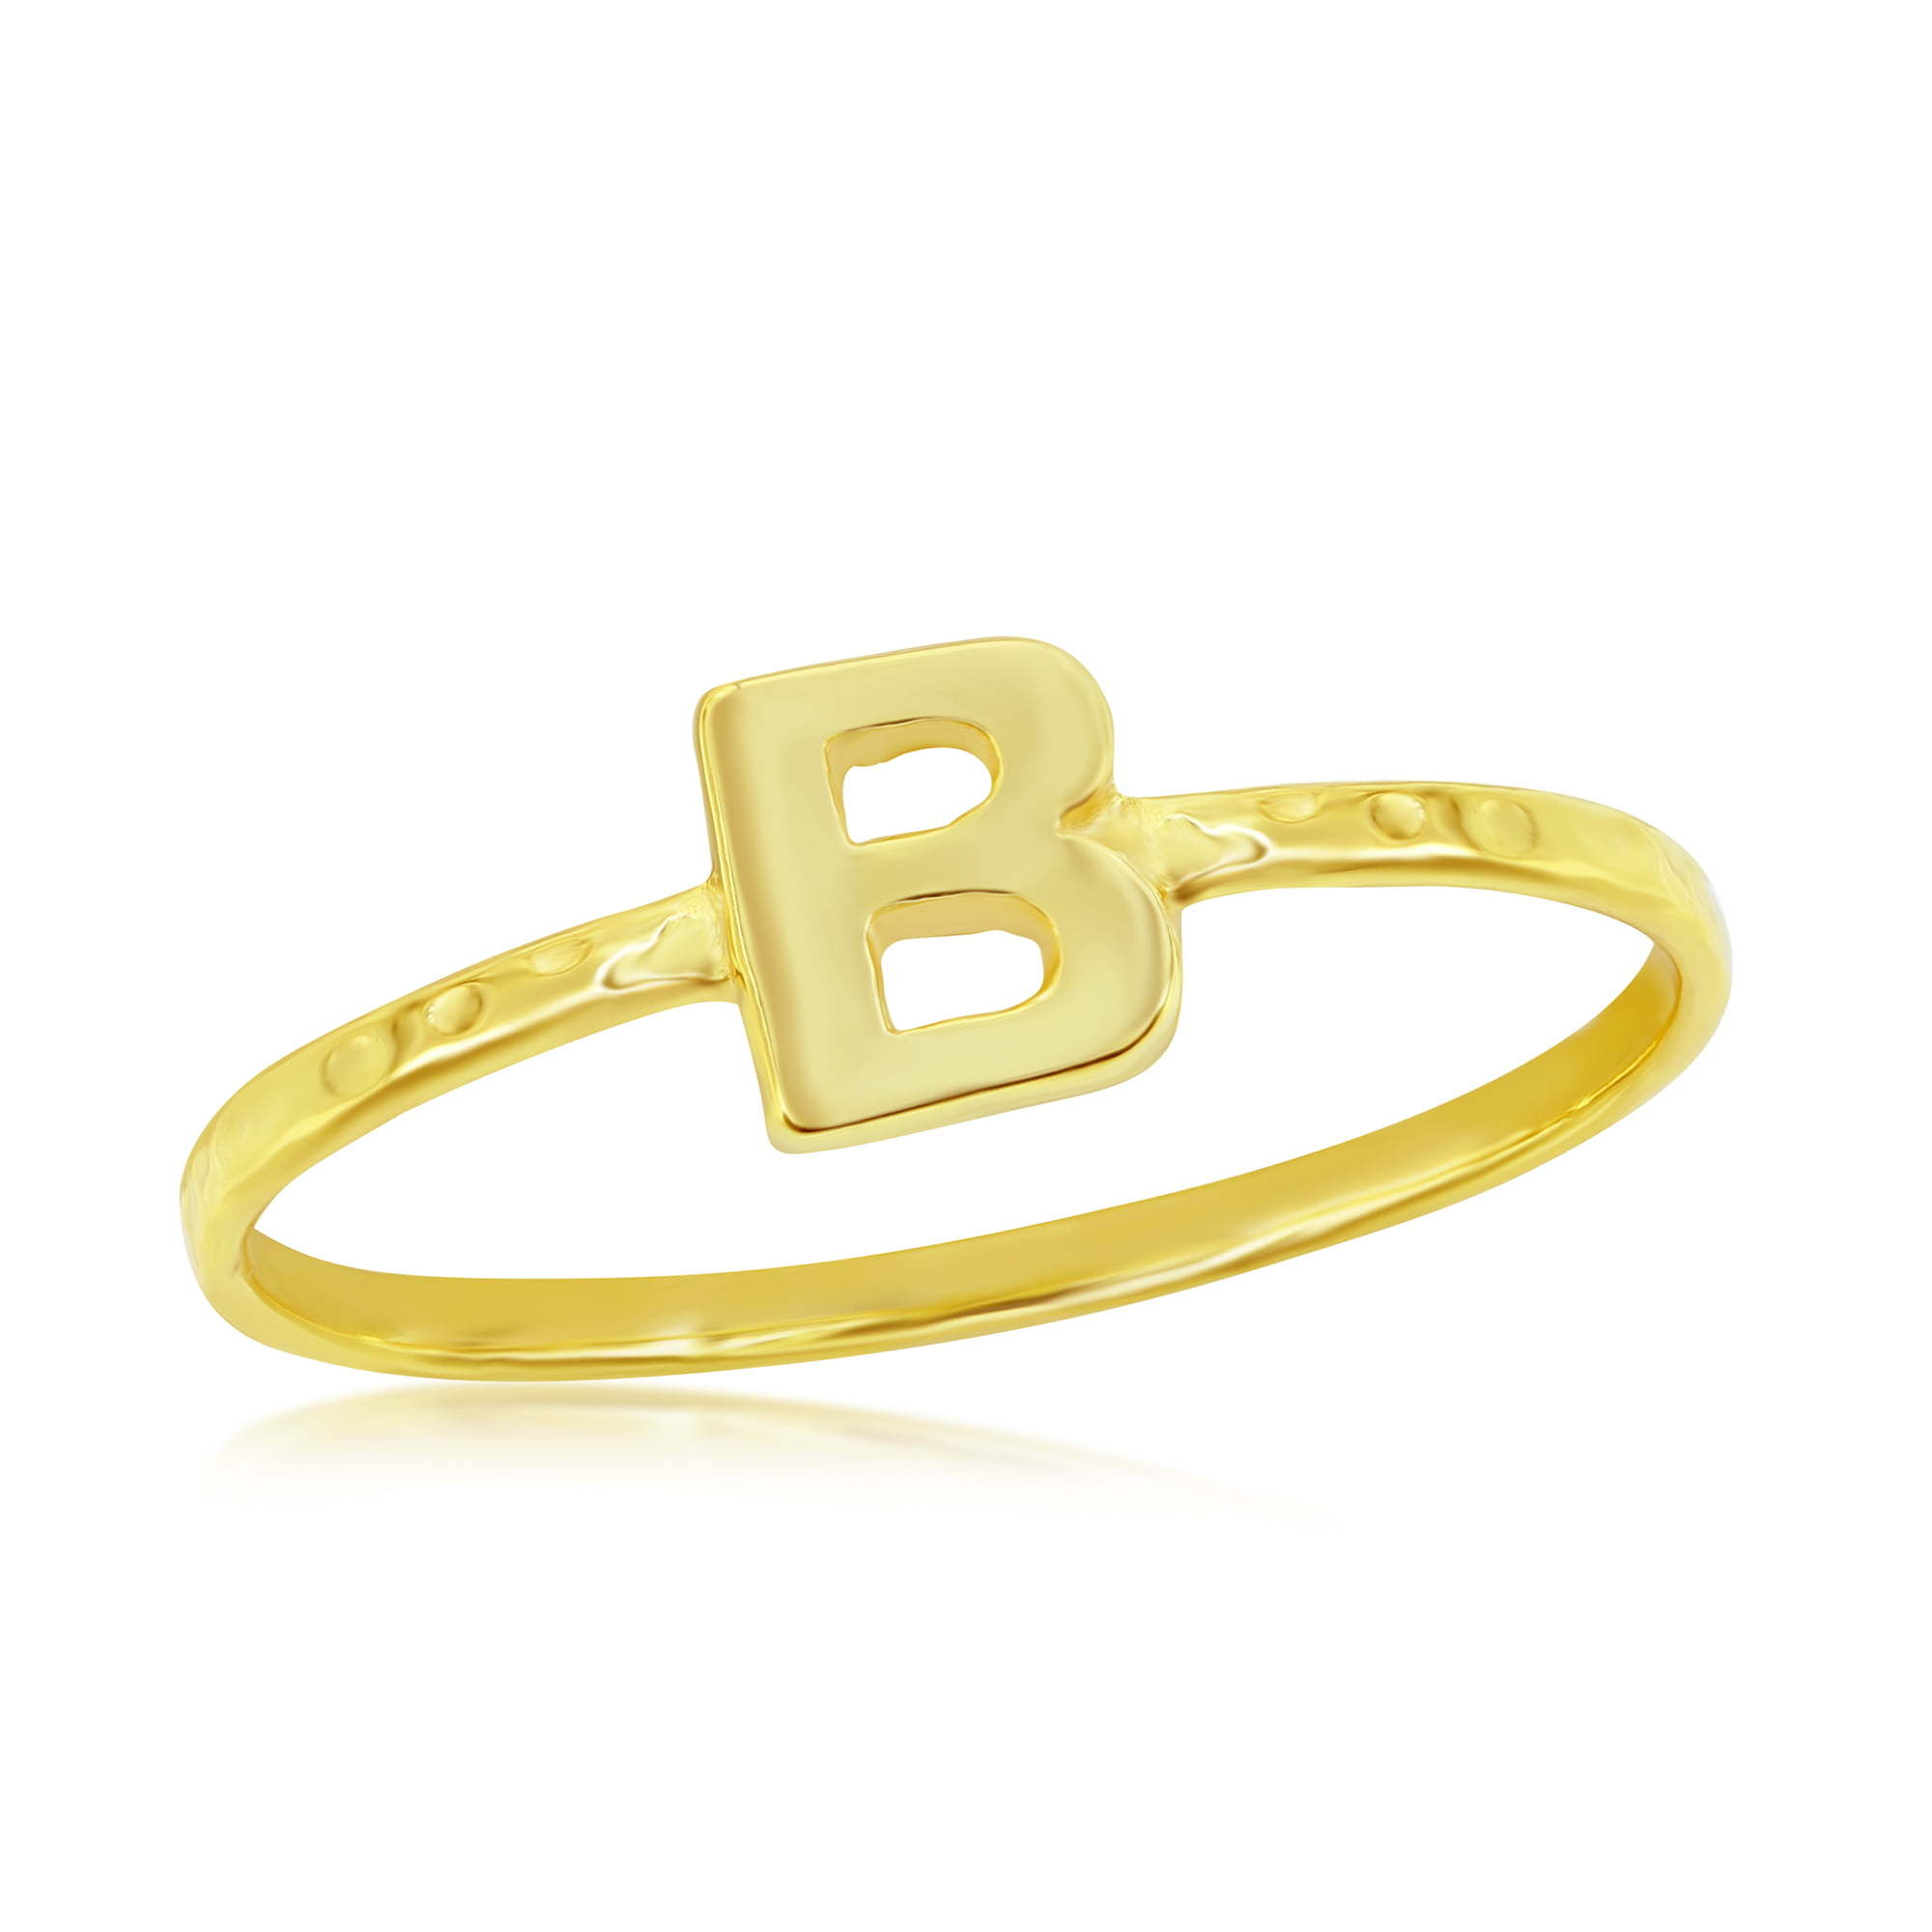 10k or 14k Real Yellow Gold White CZ Accent Letter G Initial Ring | eBay